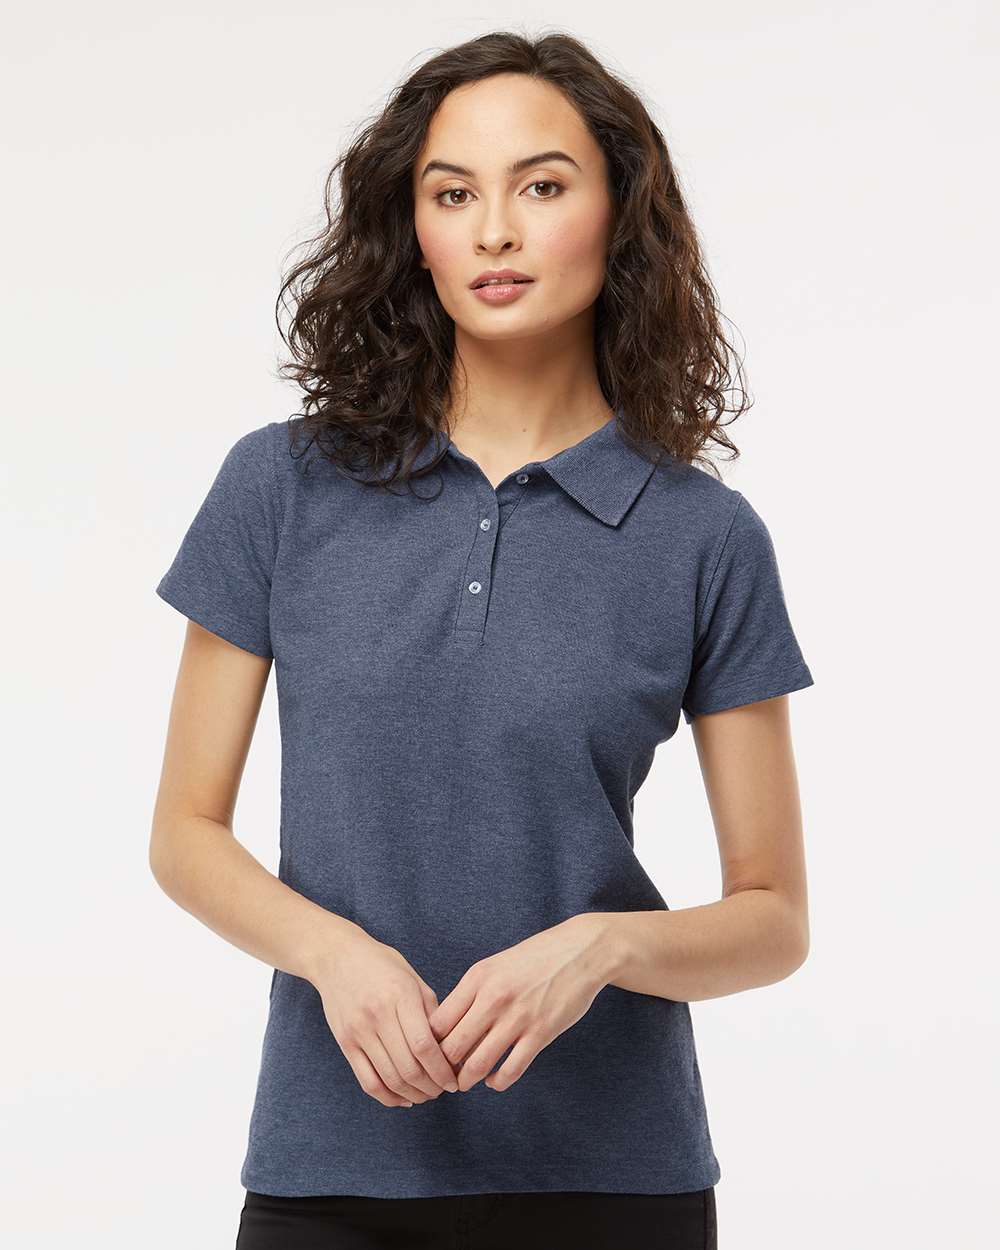 M&O Women’s Soft Touch Polo #7007 Navy Heather